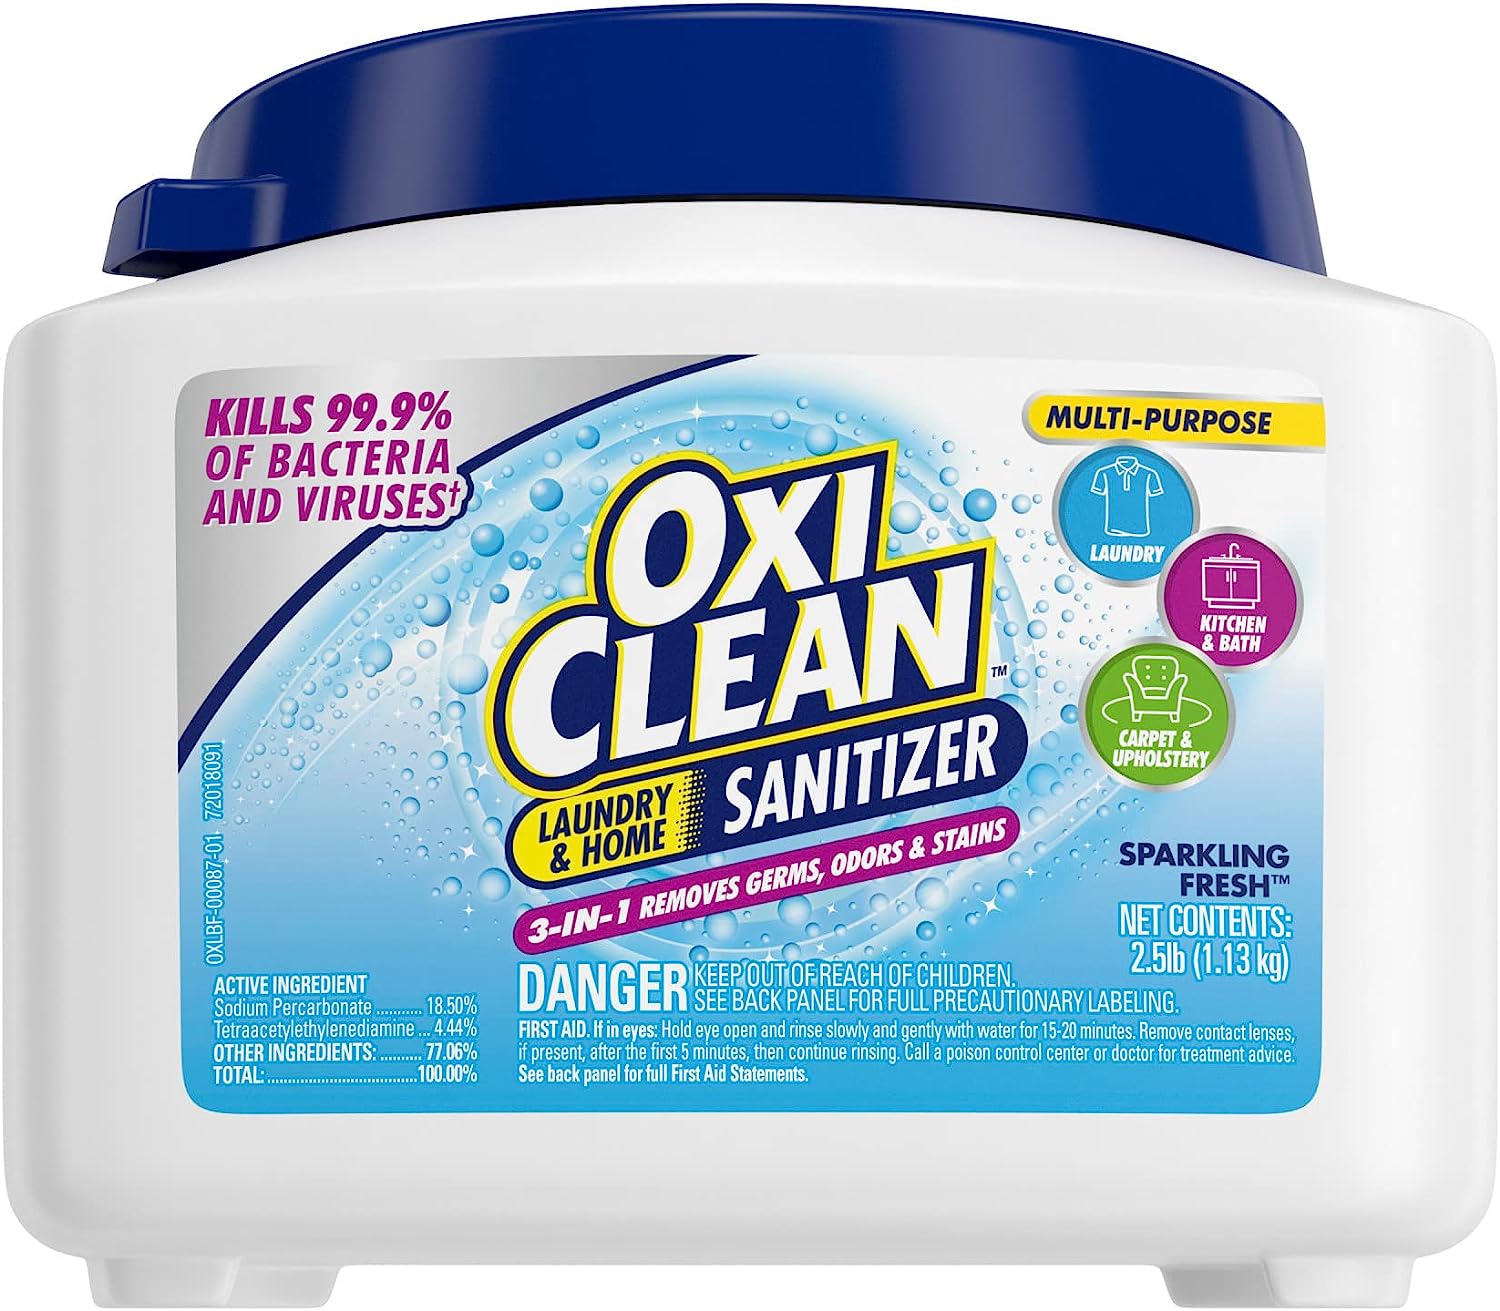 OxiClean Laundry & Home Sanitizer for Laundry, [...]